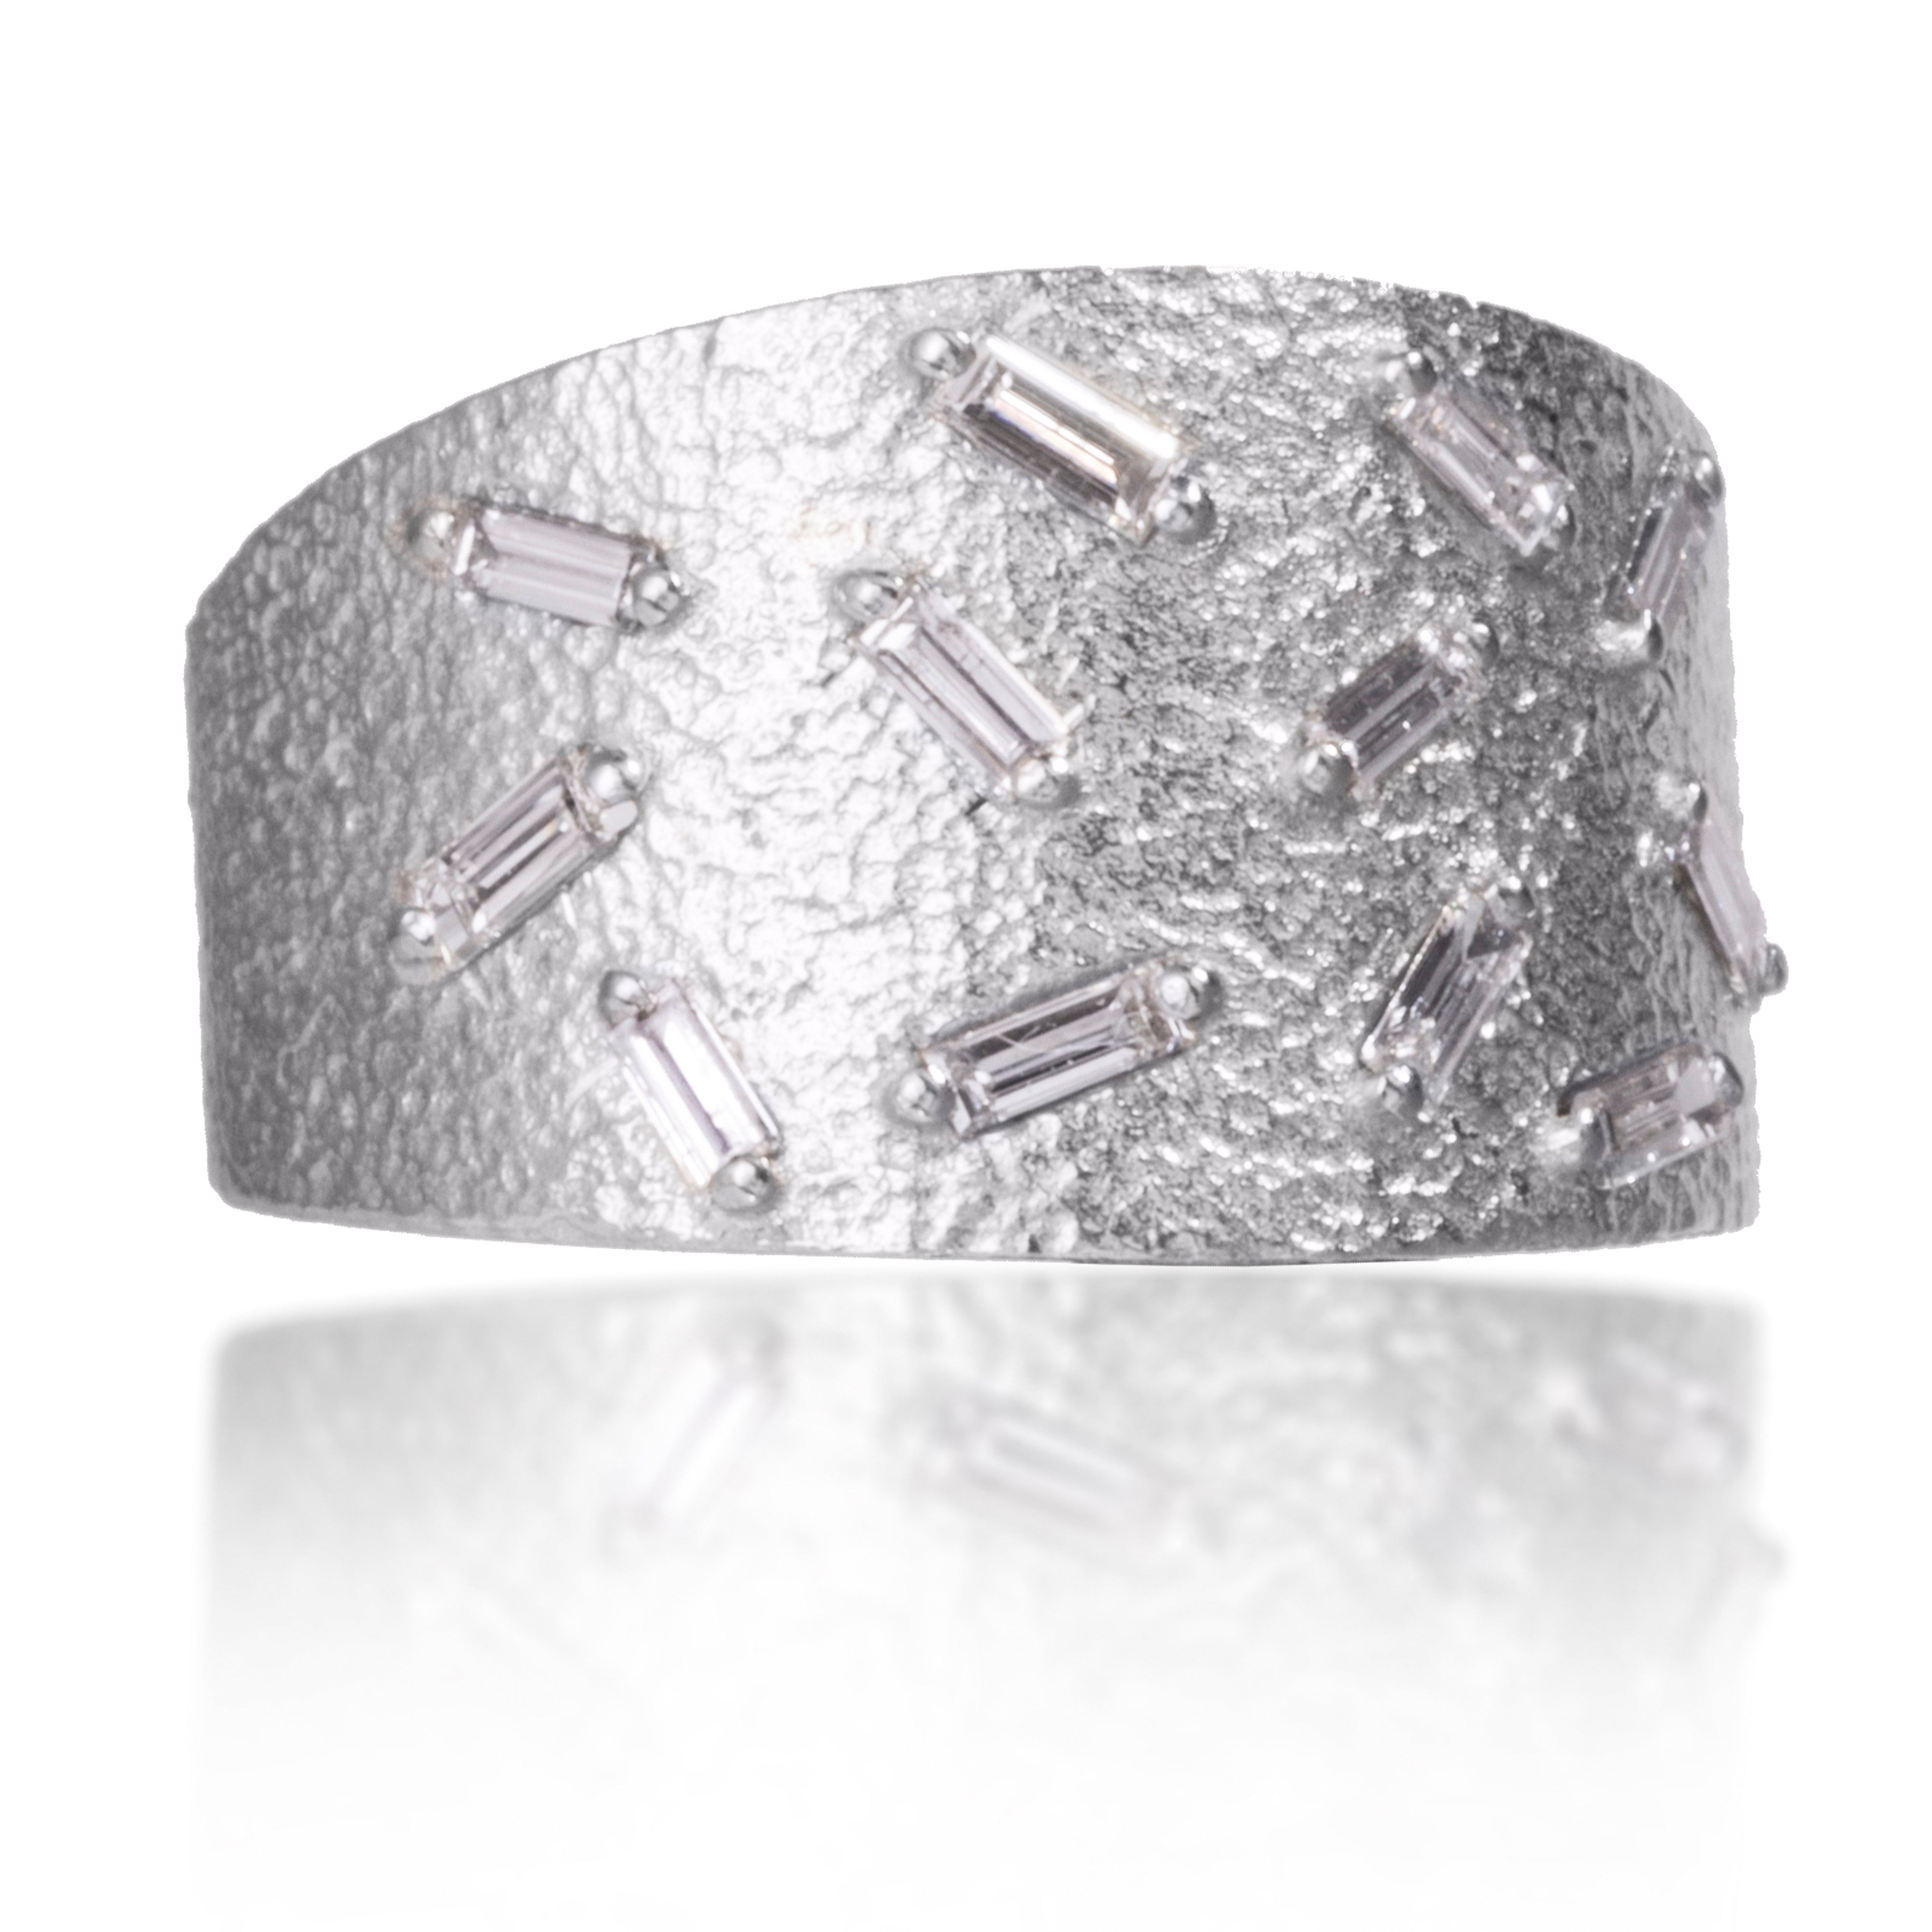 This medium width cigar band style ring is set with 12 white diamond baguettes. It is available in three richly textured color ways, oxidized silver, 18k gold, and palladium. Makes a beautiful bridal alternative. 0.4023 tcw. 